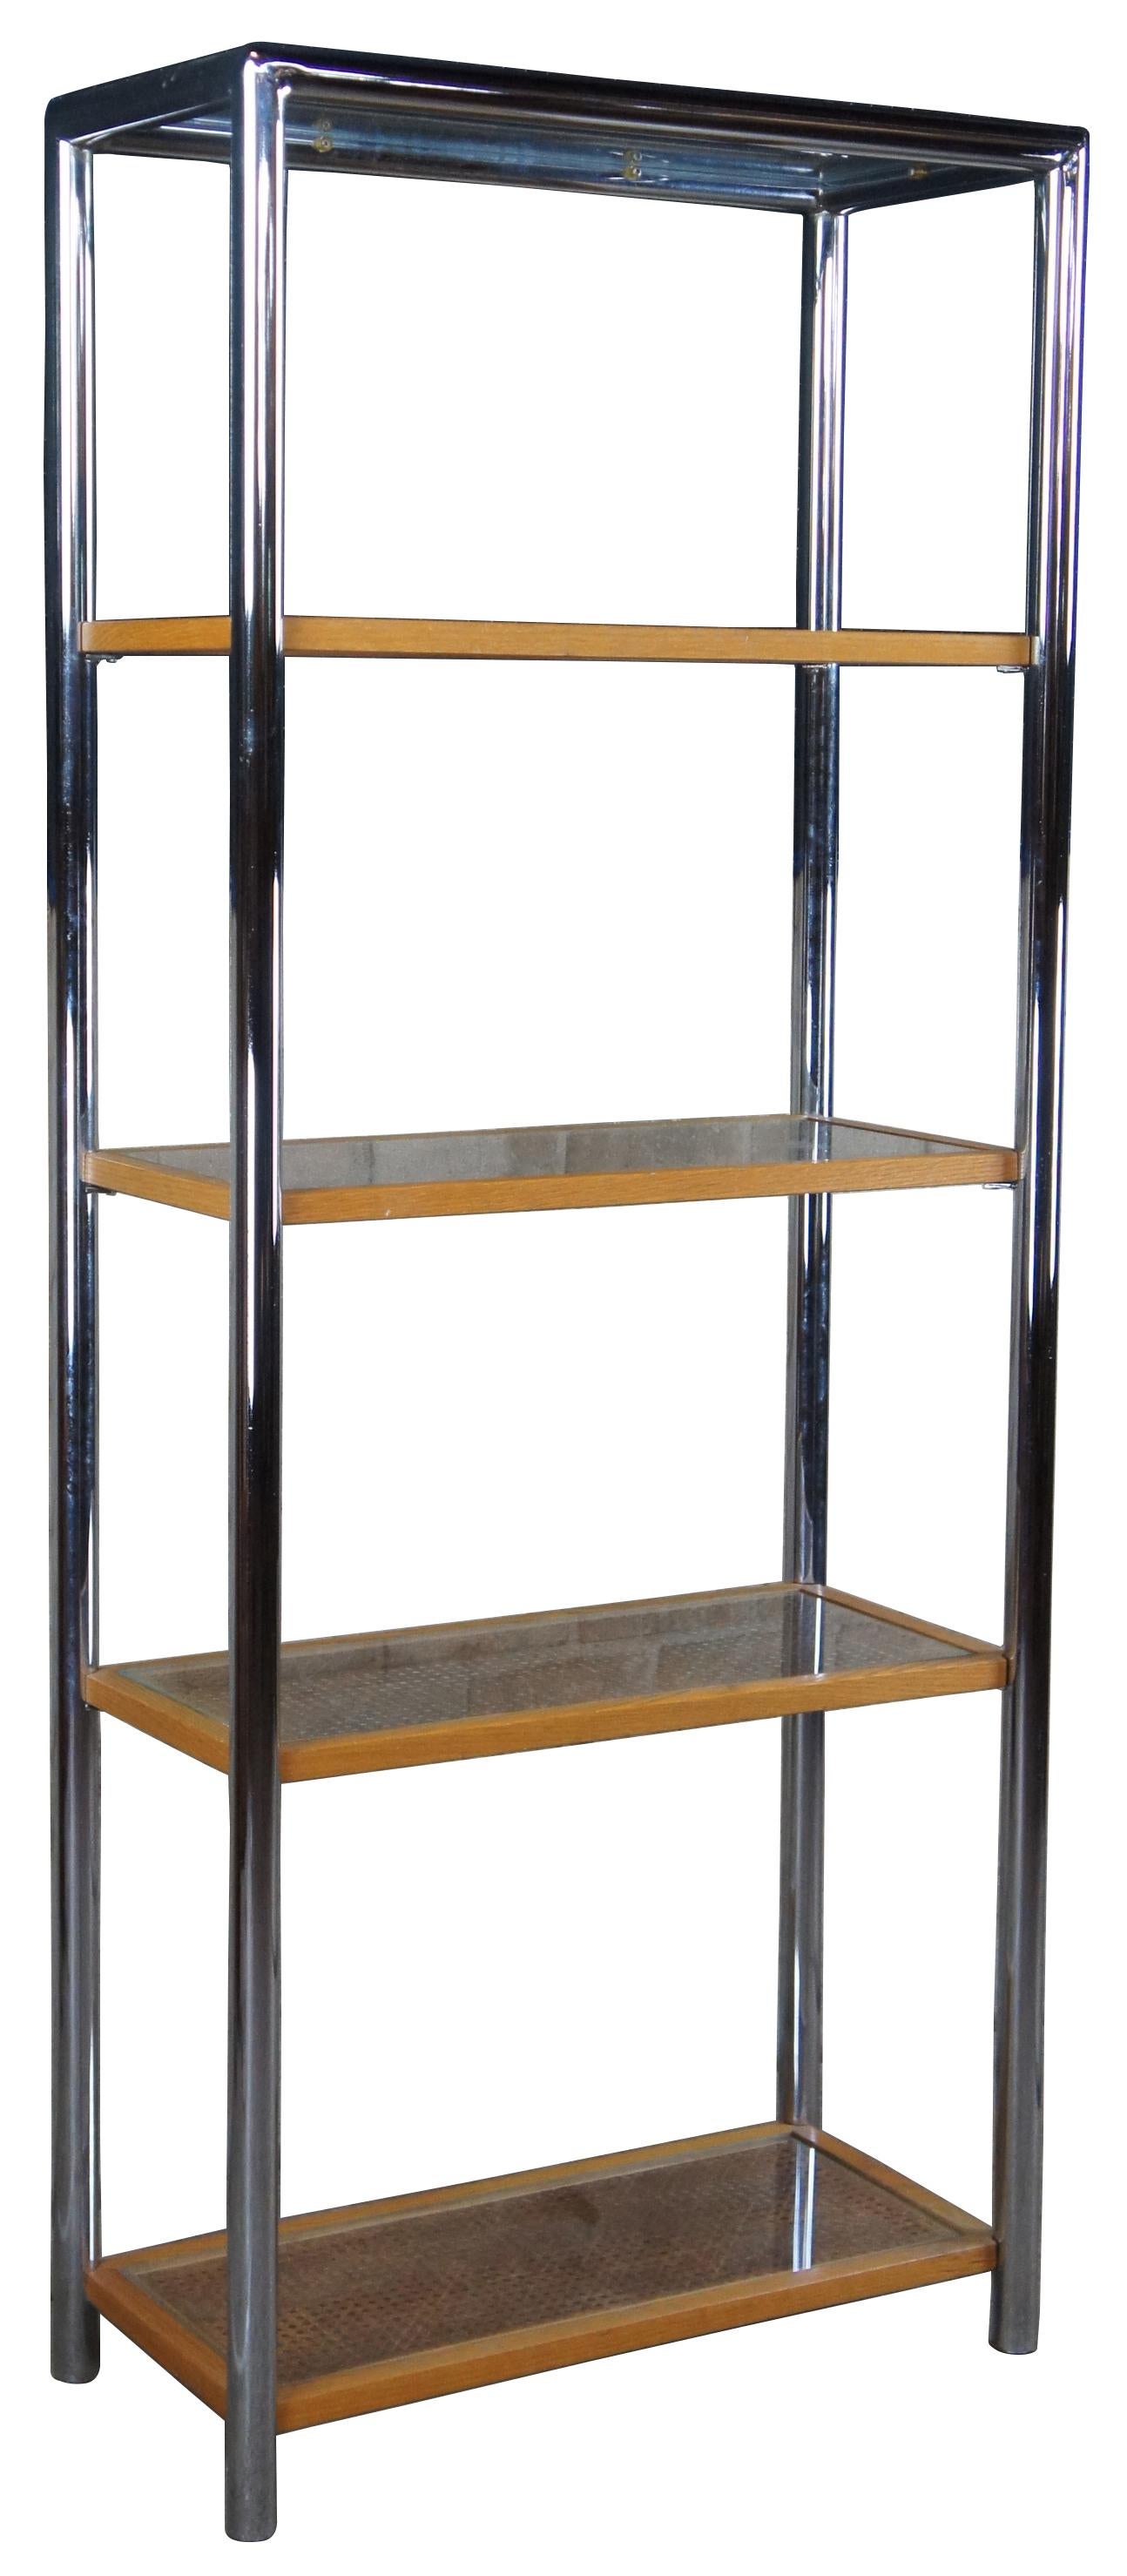 Vintage 1970s Milo Baughman for Design Institute etagere. Made of tubular chrome featuring caned shelves protected by glass.
 